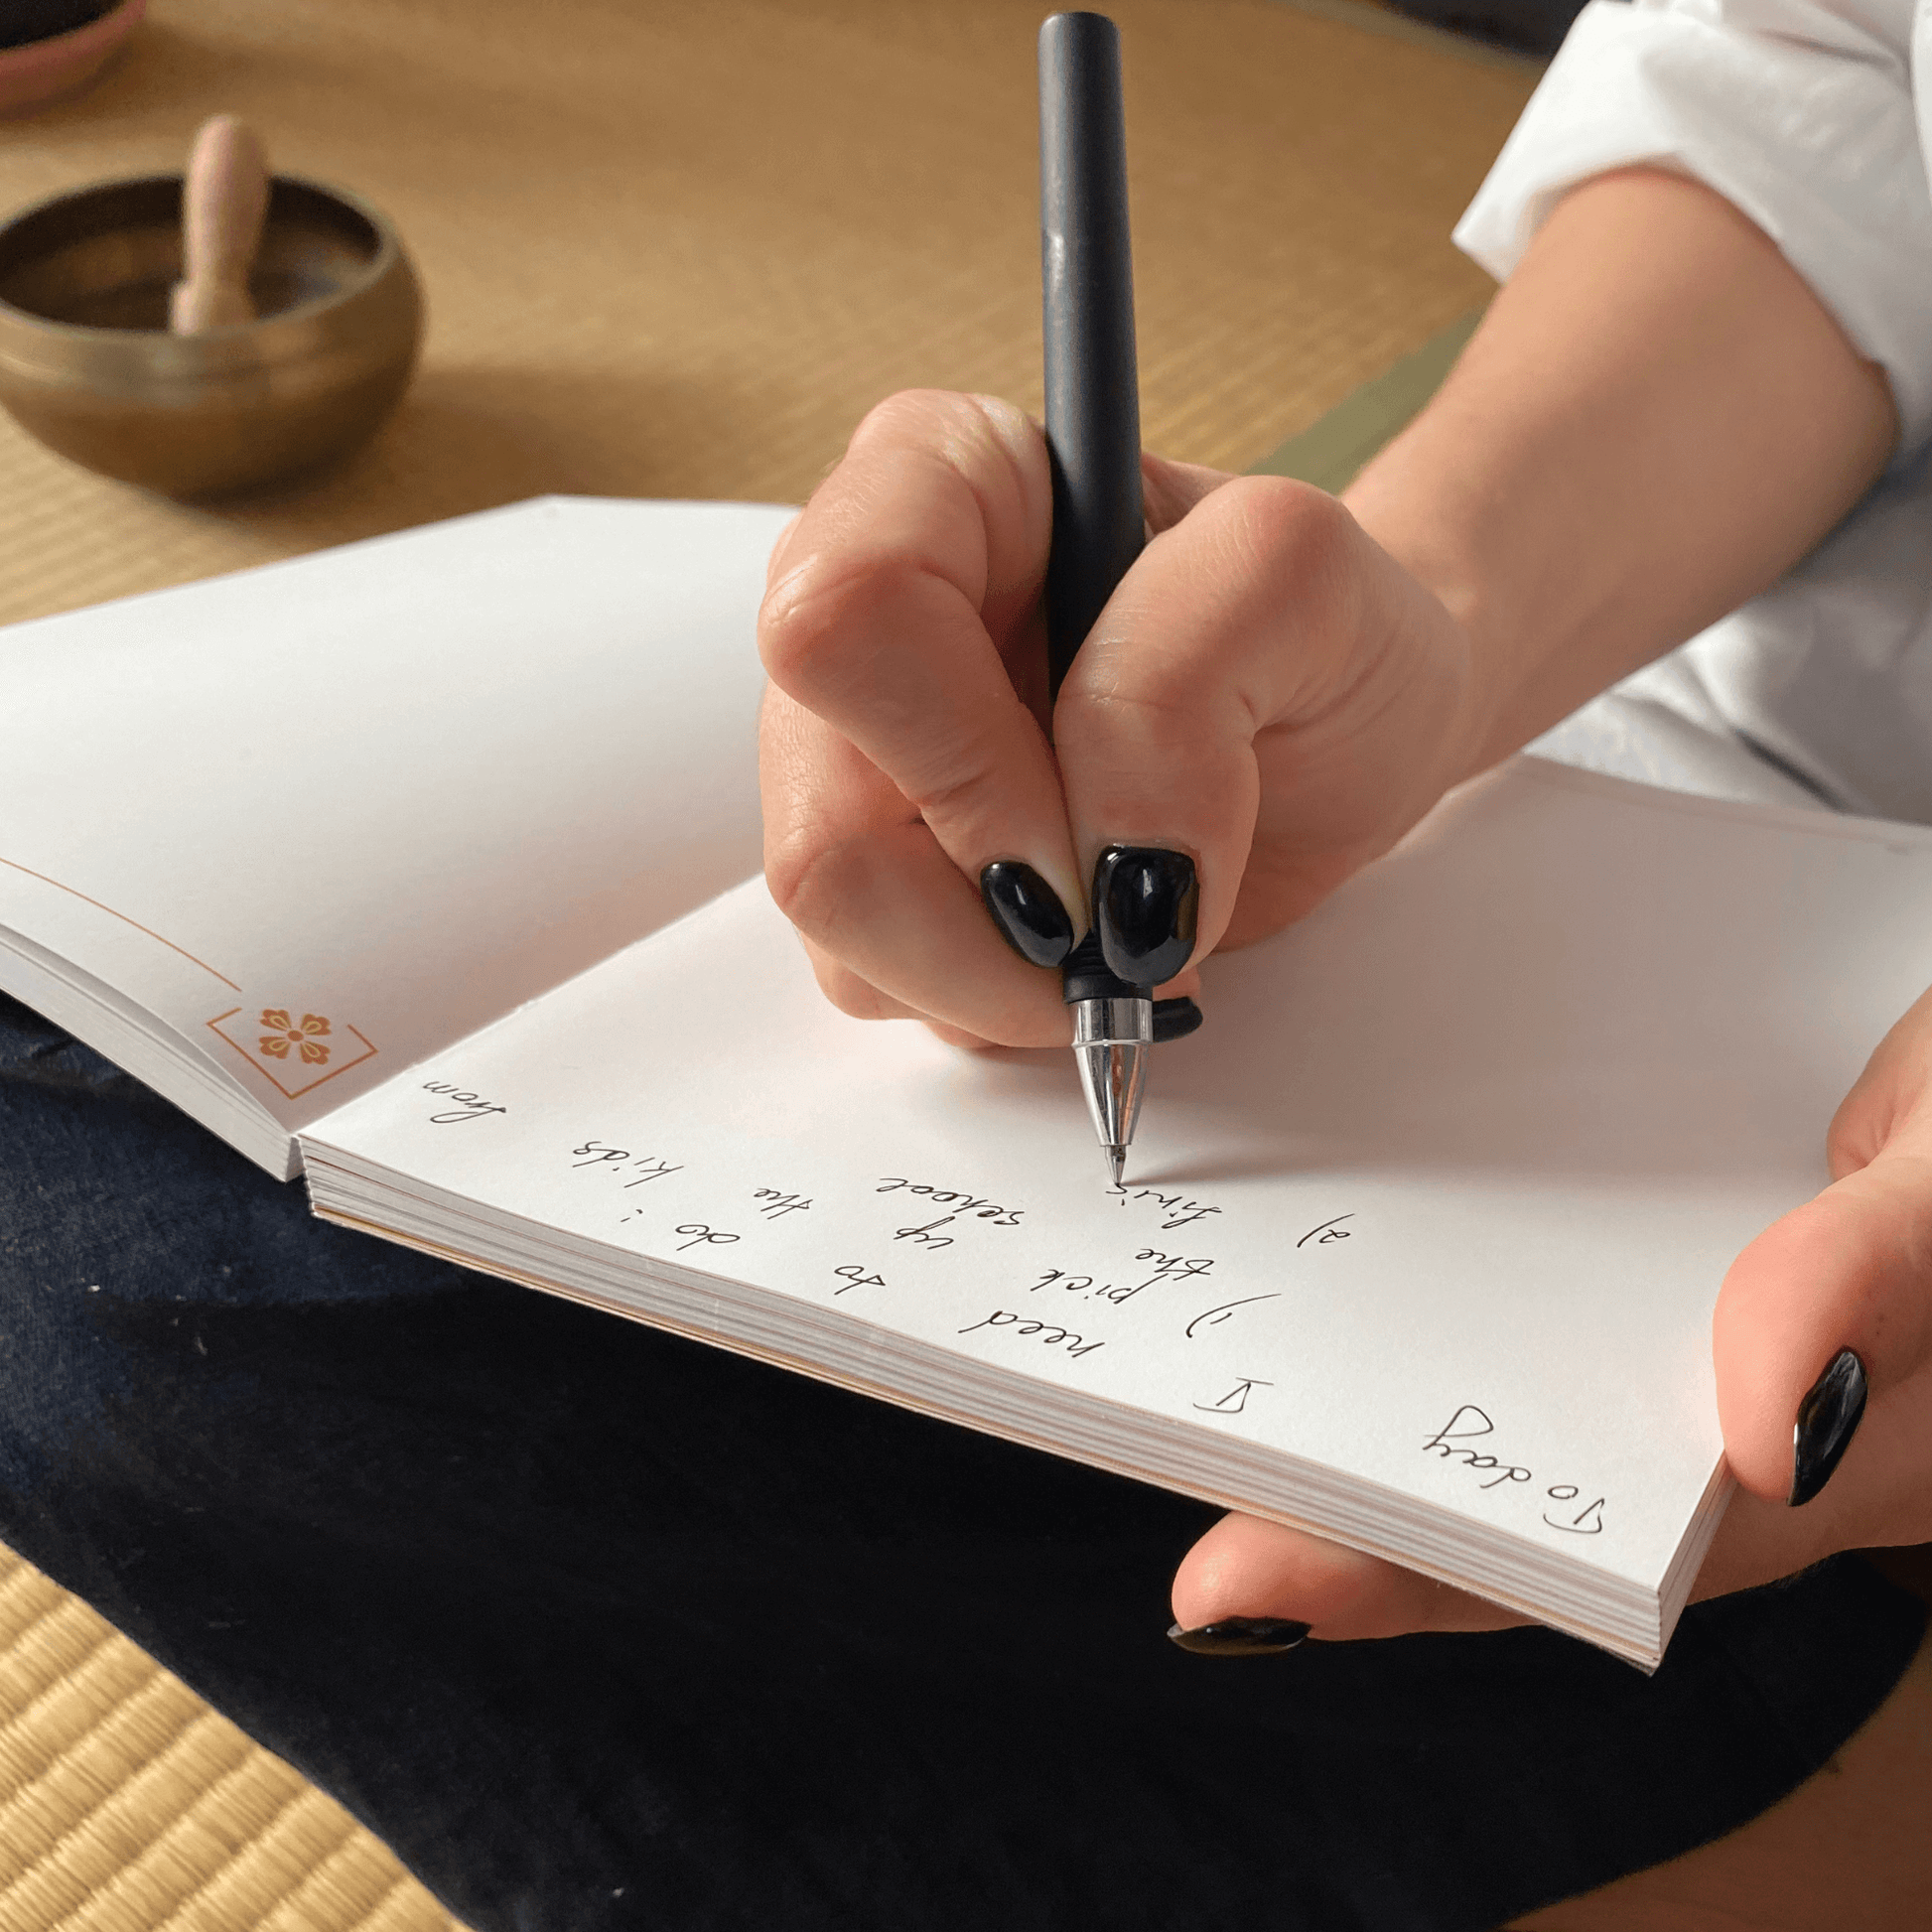 Writing affirmations in a meditation journal.